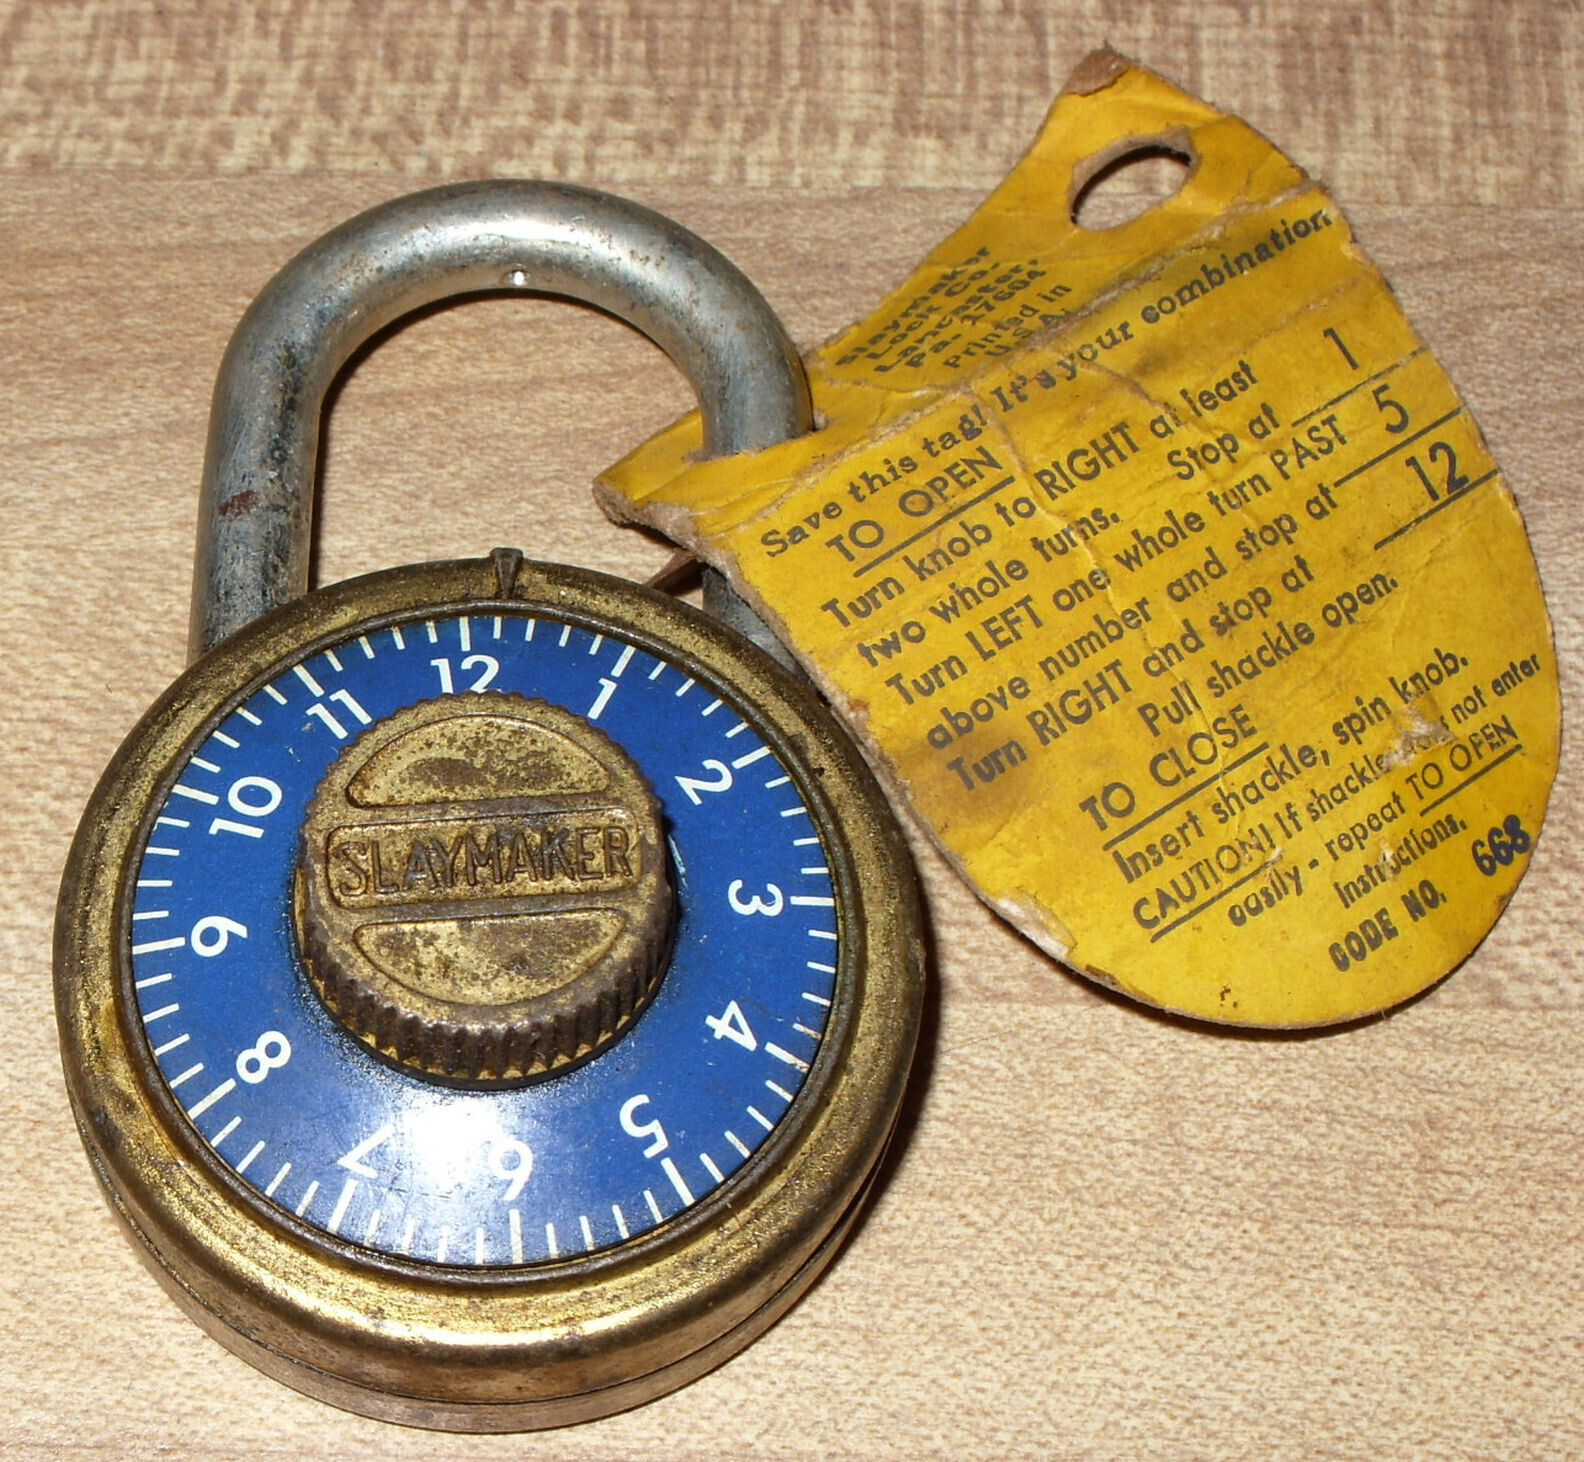 VINTAGE SLAYMAKER BLUE DIAL BRASS COMBINATION LOCK, WORKING WITH COMBINATION